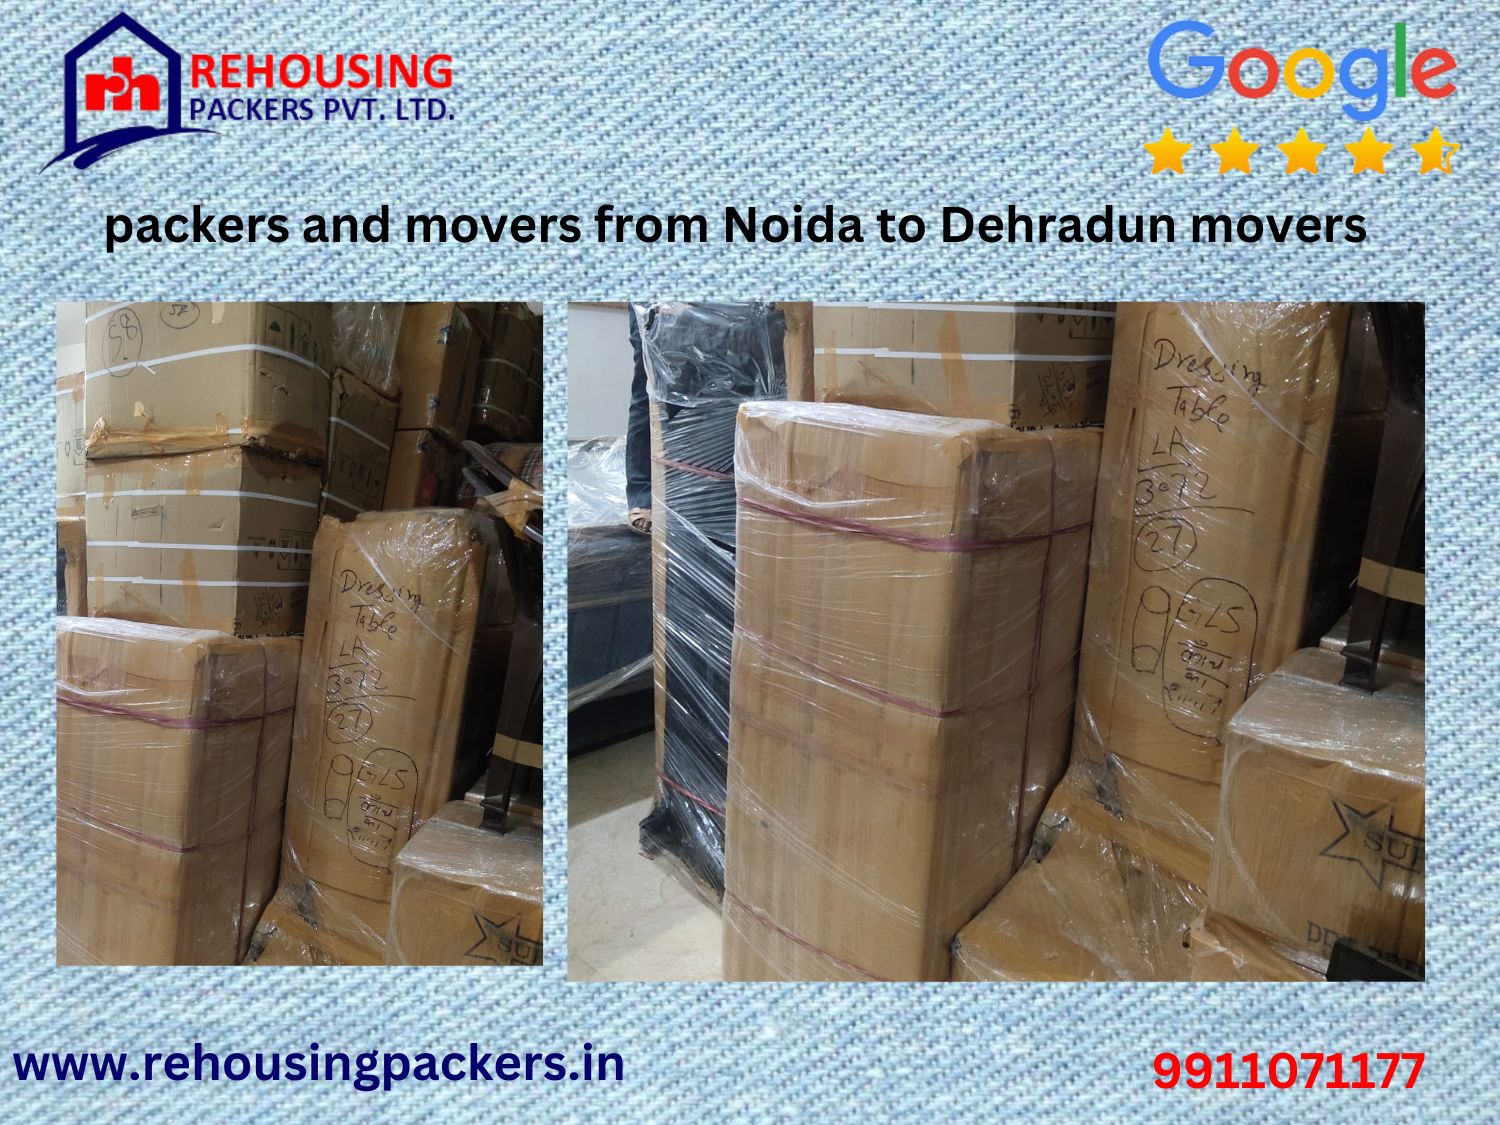 Packers and Movers from Noida to Dehradun